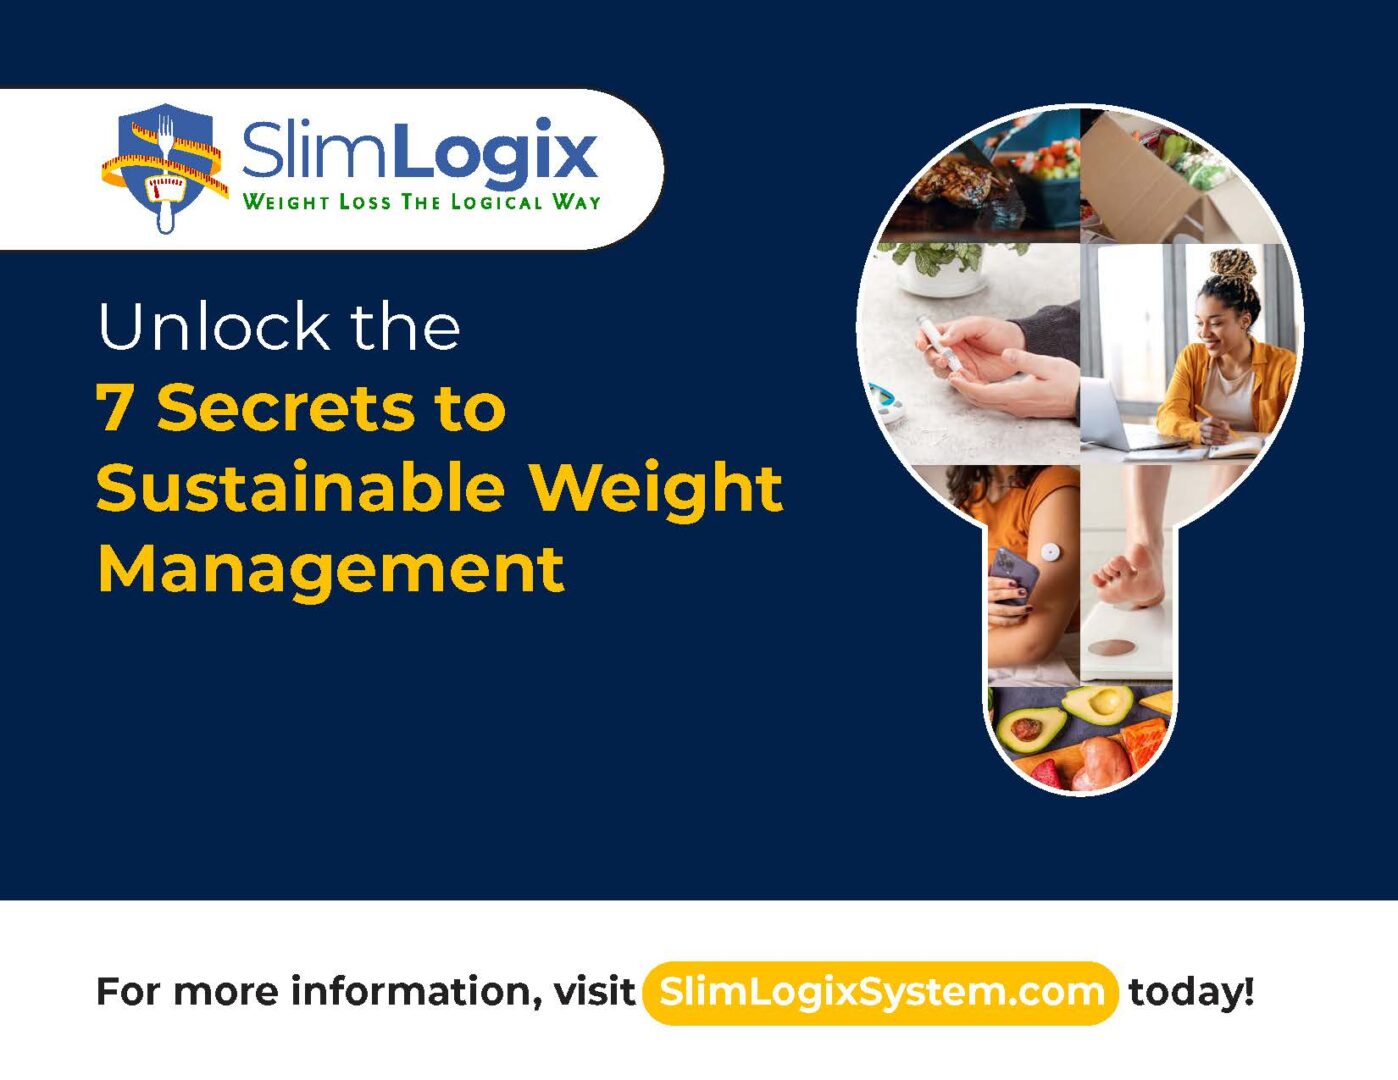 Unlock the 7 Secrets to Sustainable Weight Management